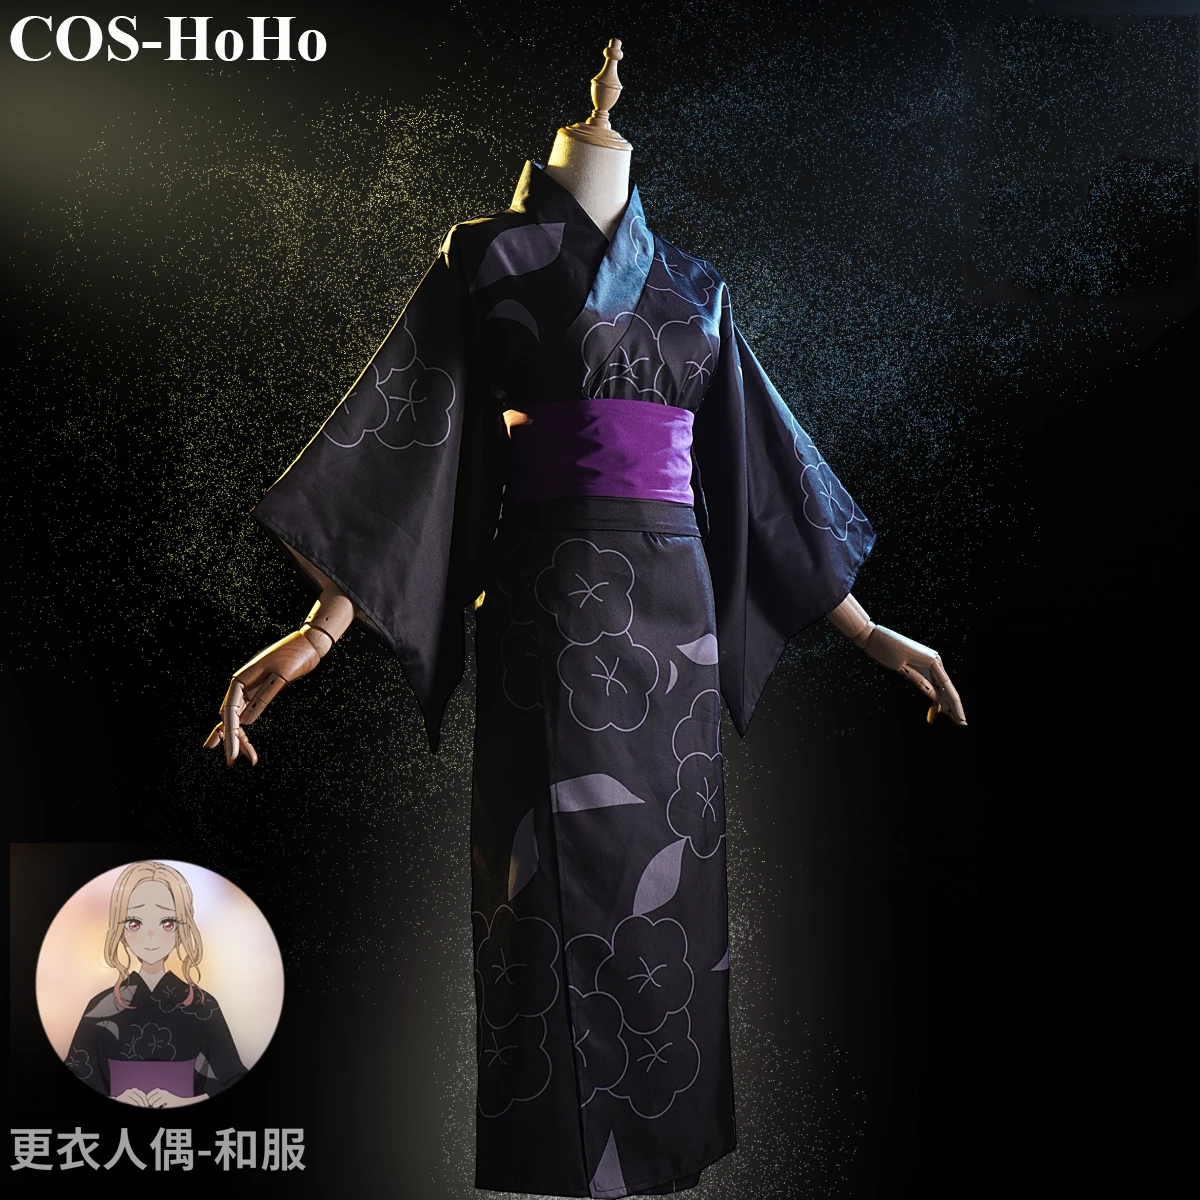 

COS-HoHo Anime My Dress-Up Darling Kitagawa Marin Game Suit Summer Festival Kimono Uniform Cosplay Costume Party Outfit Women